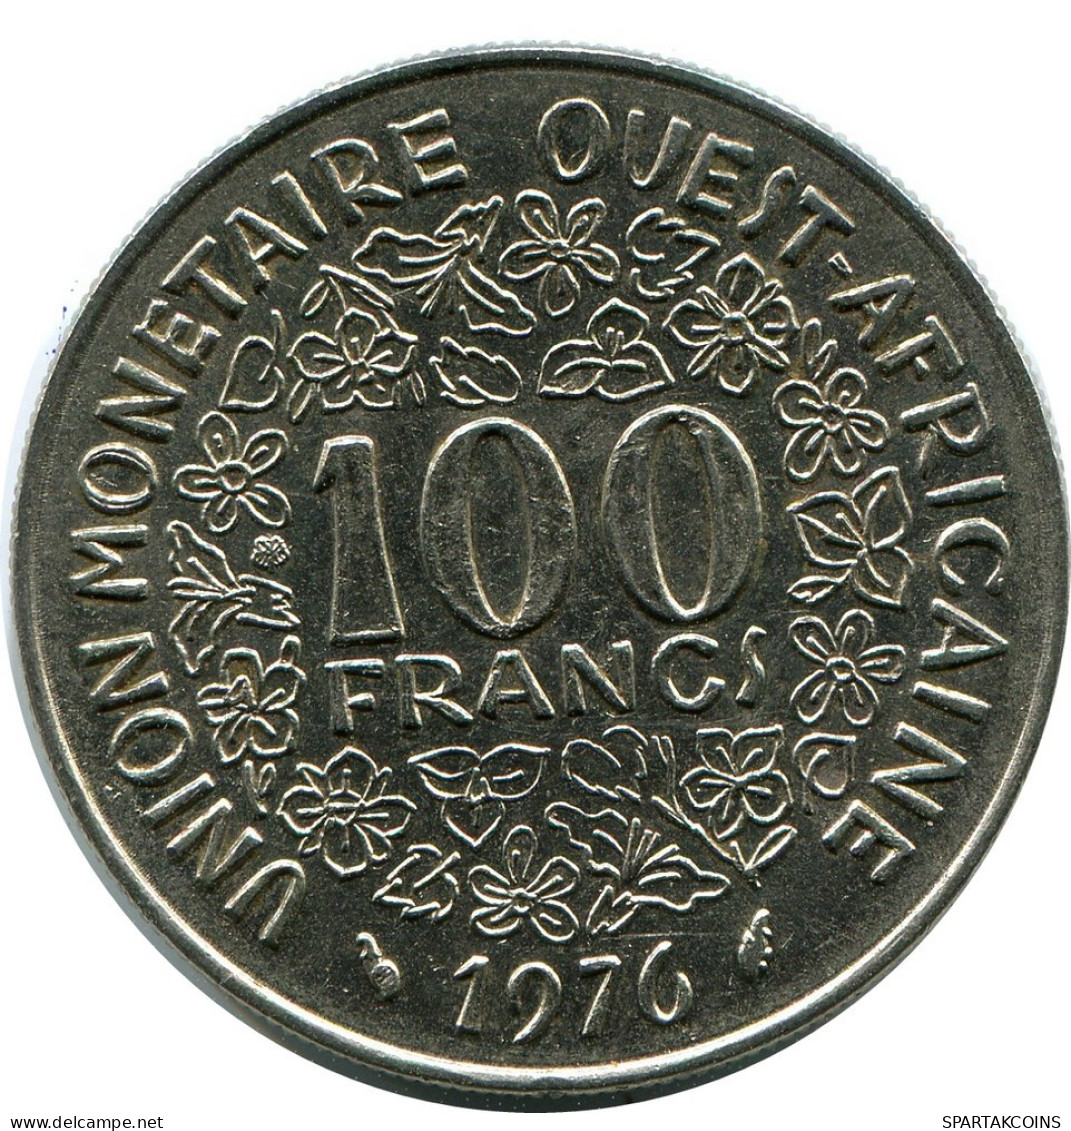 100 FRANCS 1976 WESTERN AFRICAN STATES Münze #AP961.D.A - Other - Africa